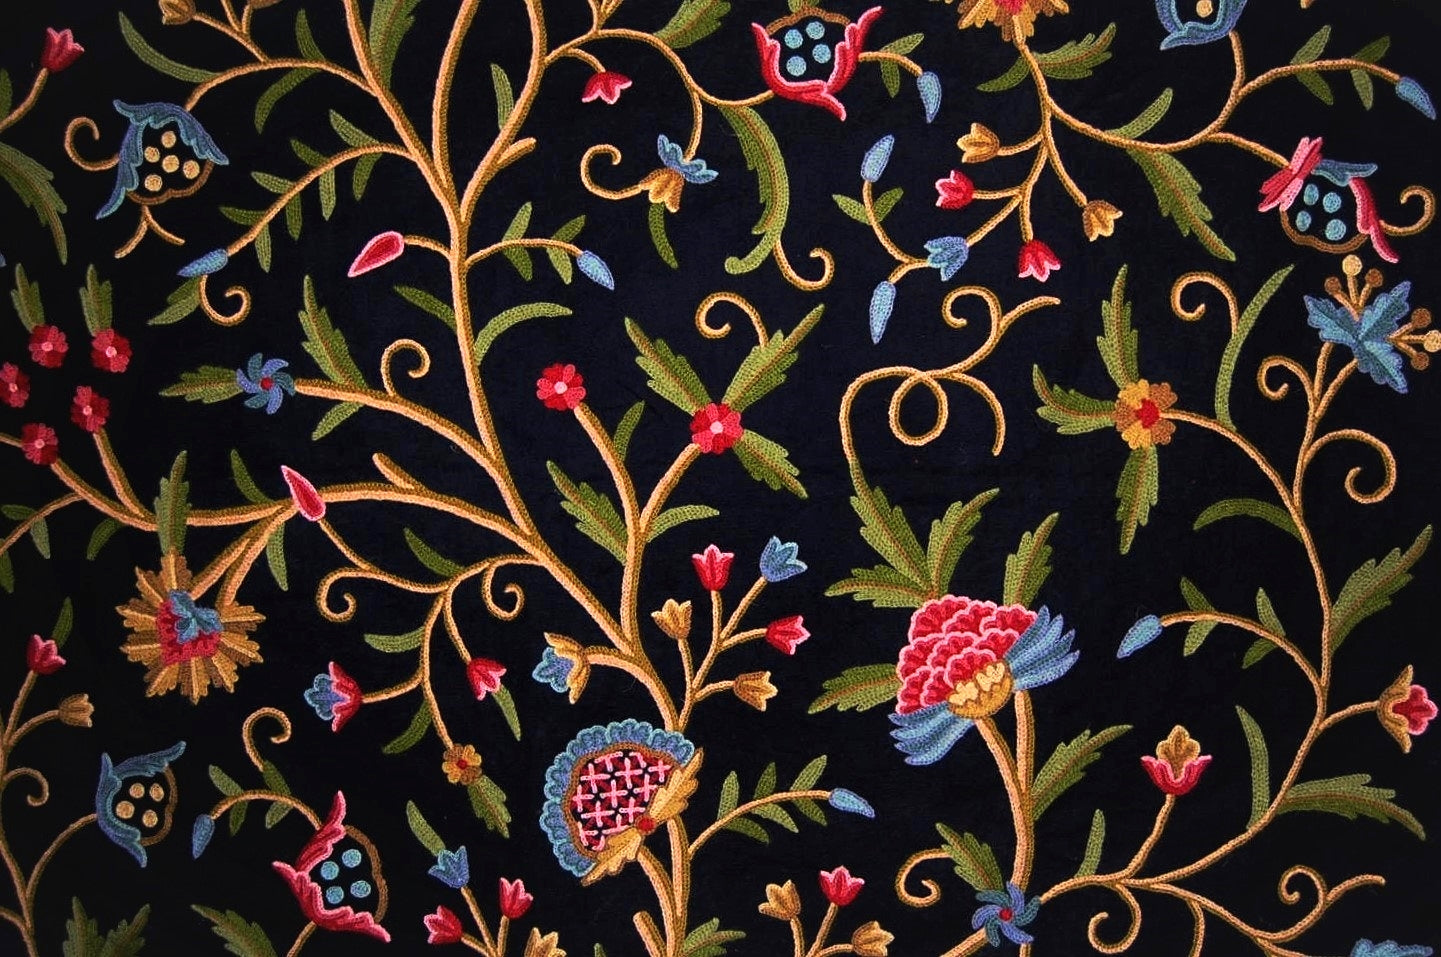 Cotton Crewel Embroidered Fabric Tree of Life Black, Multicolor #DDR20 -  Best of Kashmir